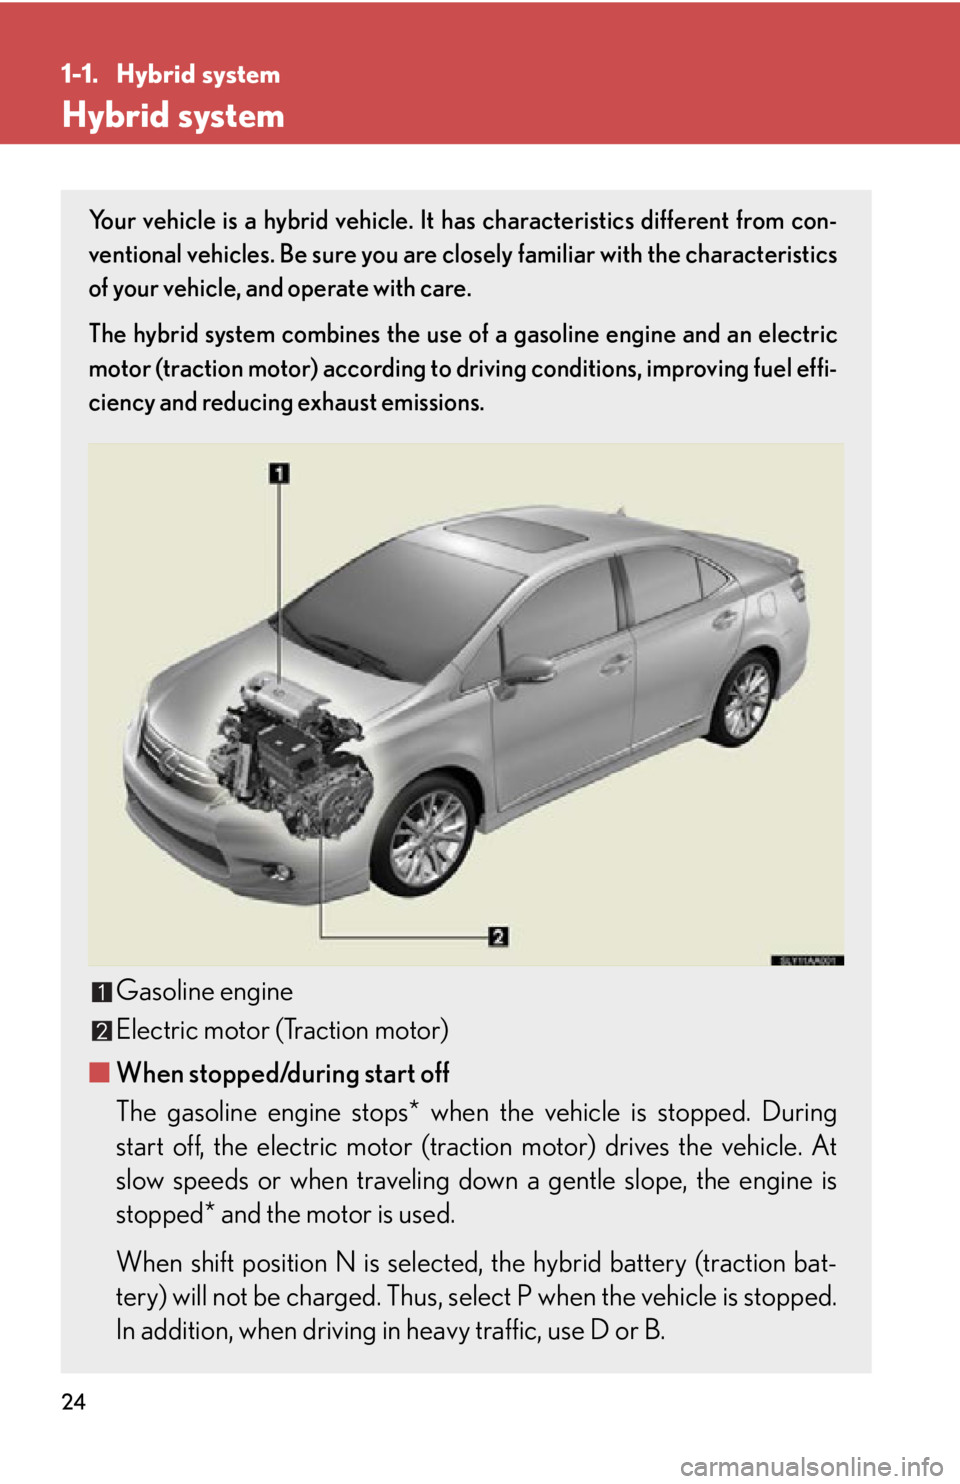 Lexus HS250h 2010  Do-it-yourself maintenance / LEXUS 2010 HS250H  (OM75006U) Owners Manual 24
1-1. Hybrid system
Hybrid system
Your vehicle is a hybrid vehicle. It has characteristics different from con-
ventional vehicles. Be sure you are clos ely familiar
  with the characteristics 
of yo